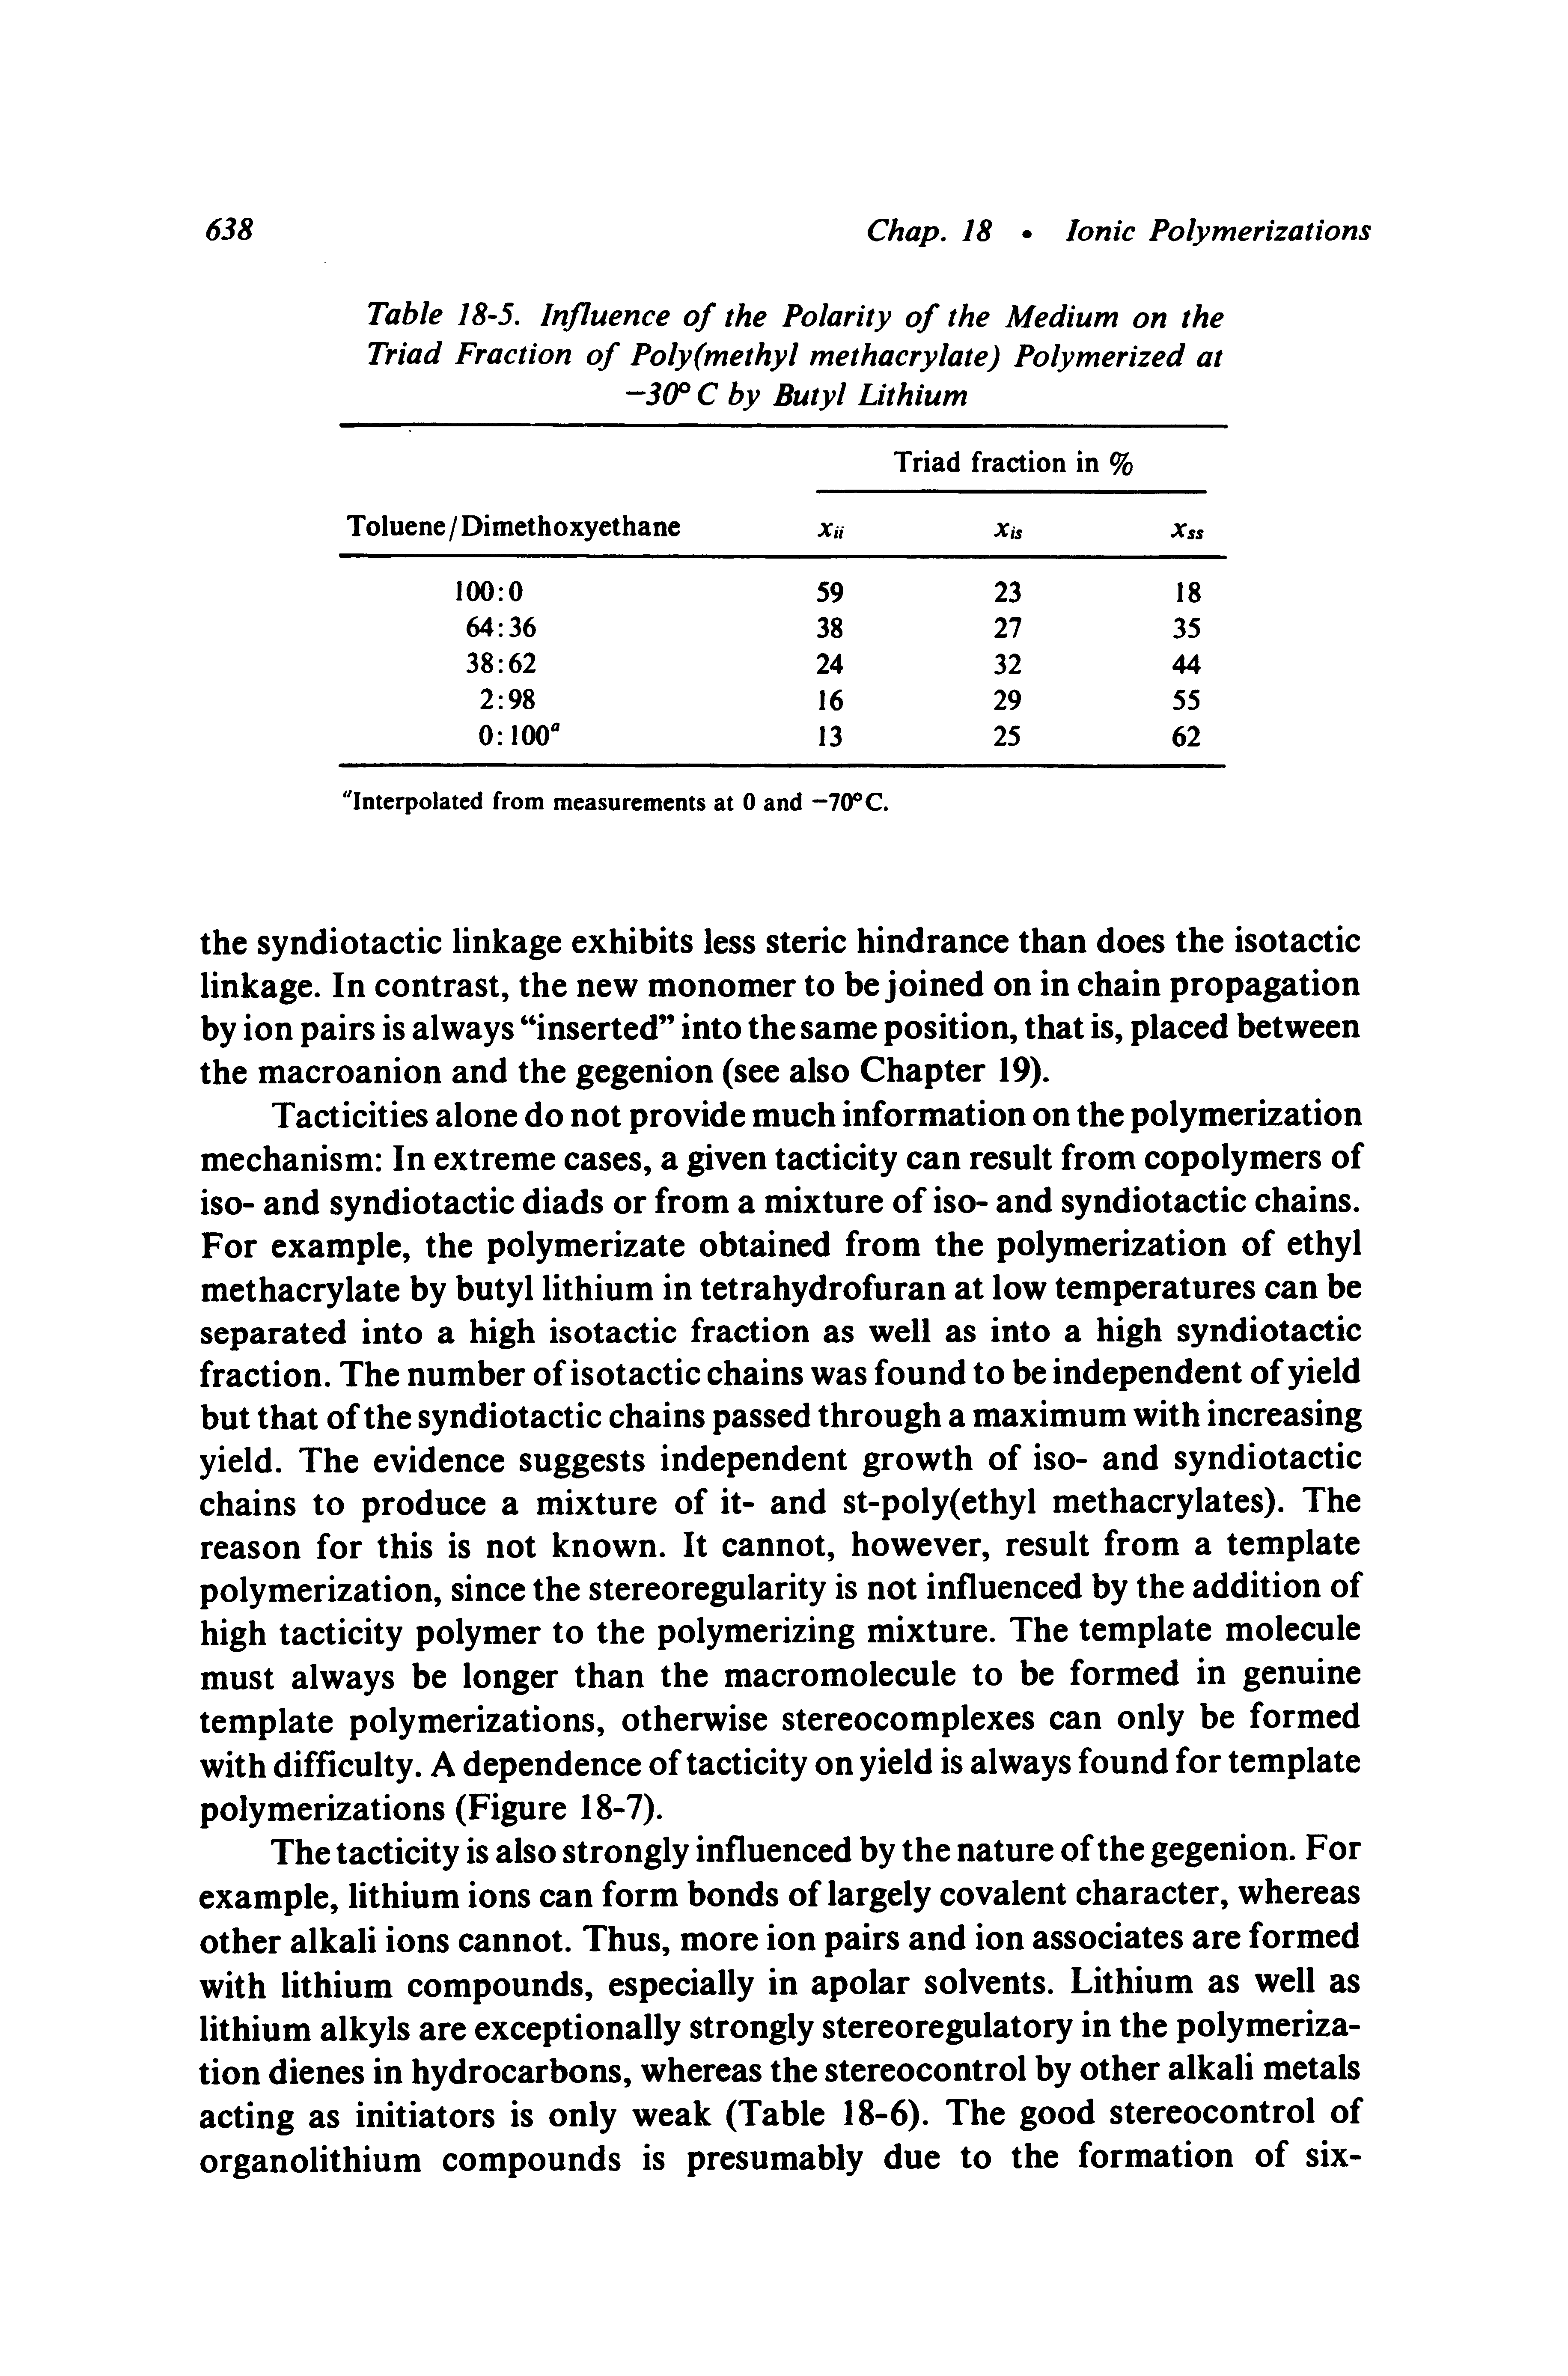 Table 18-5. Influence of the Polarity of the Medium on the Triad Fraction of Poly (methyl methacrylate) Polymerized at —30° C by Butyl Lithium...